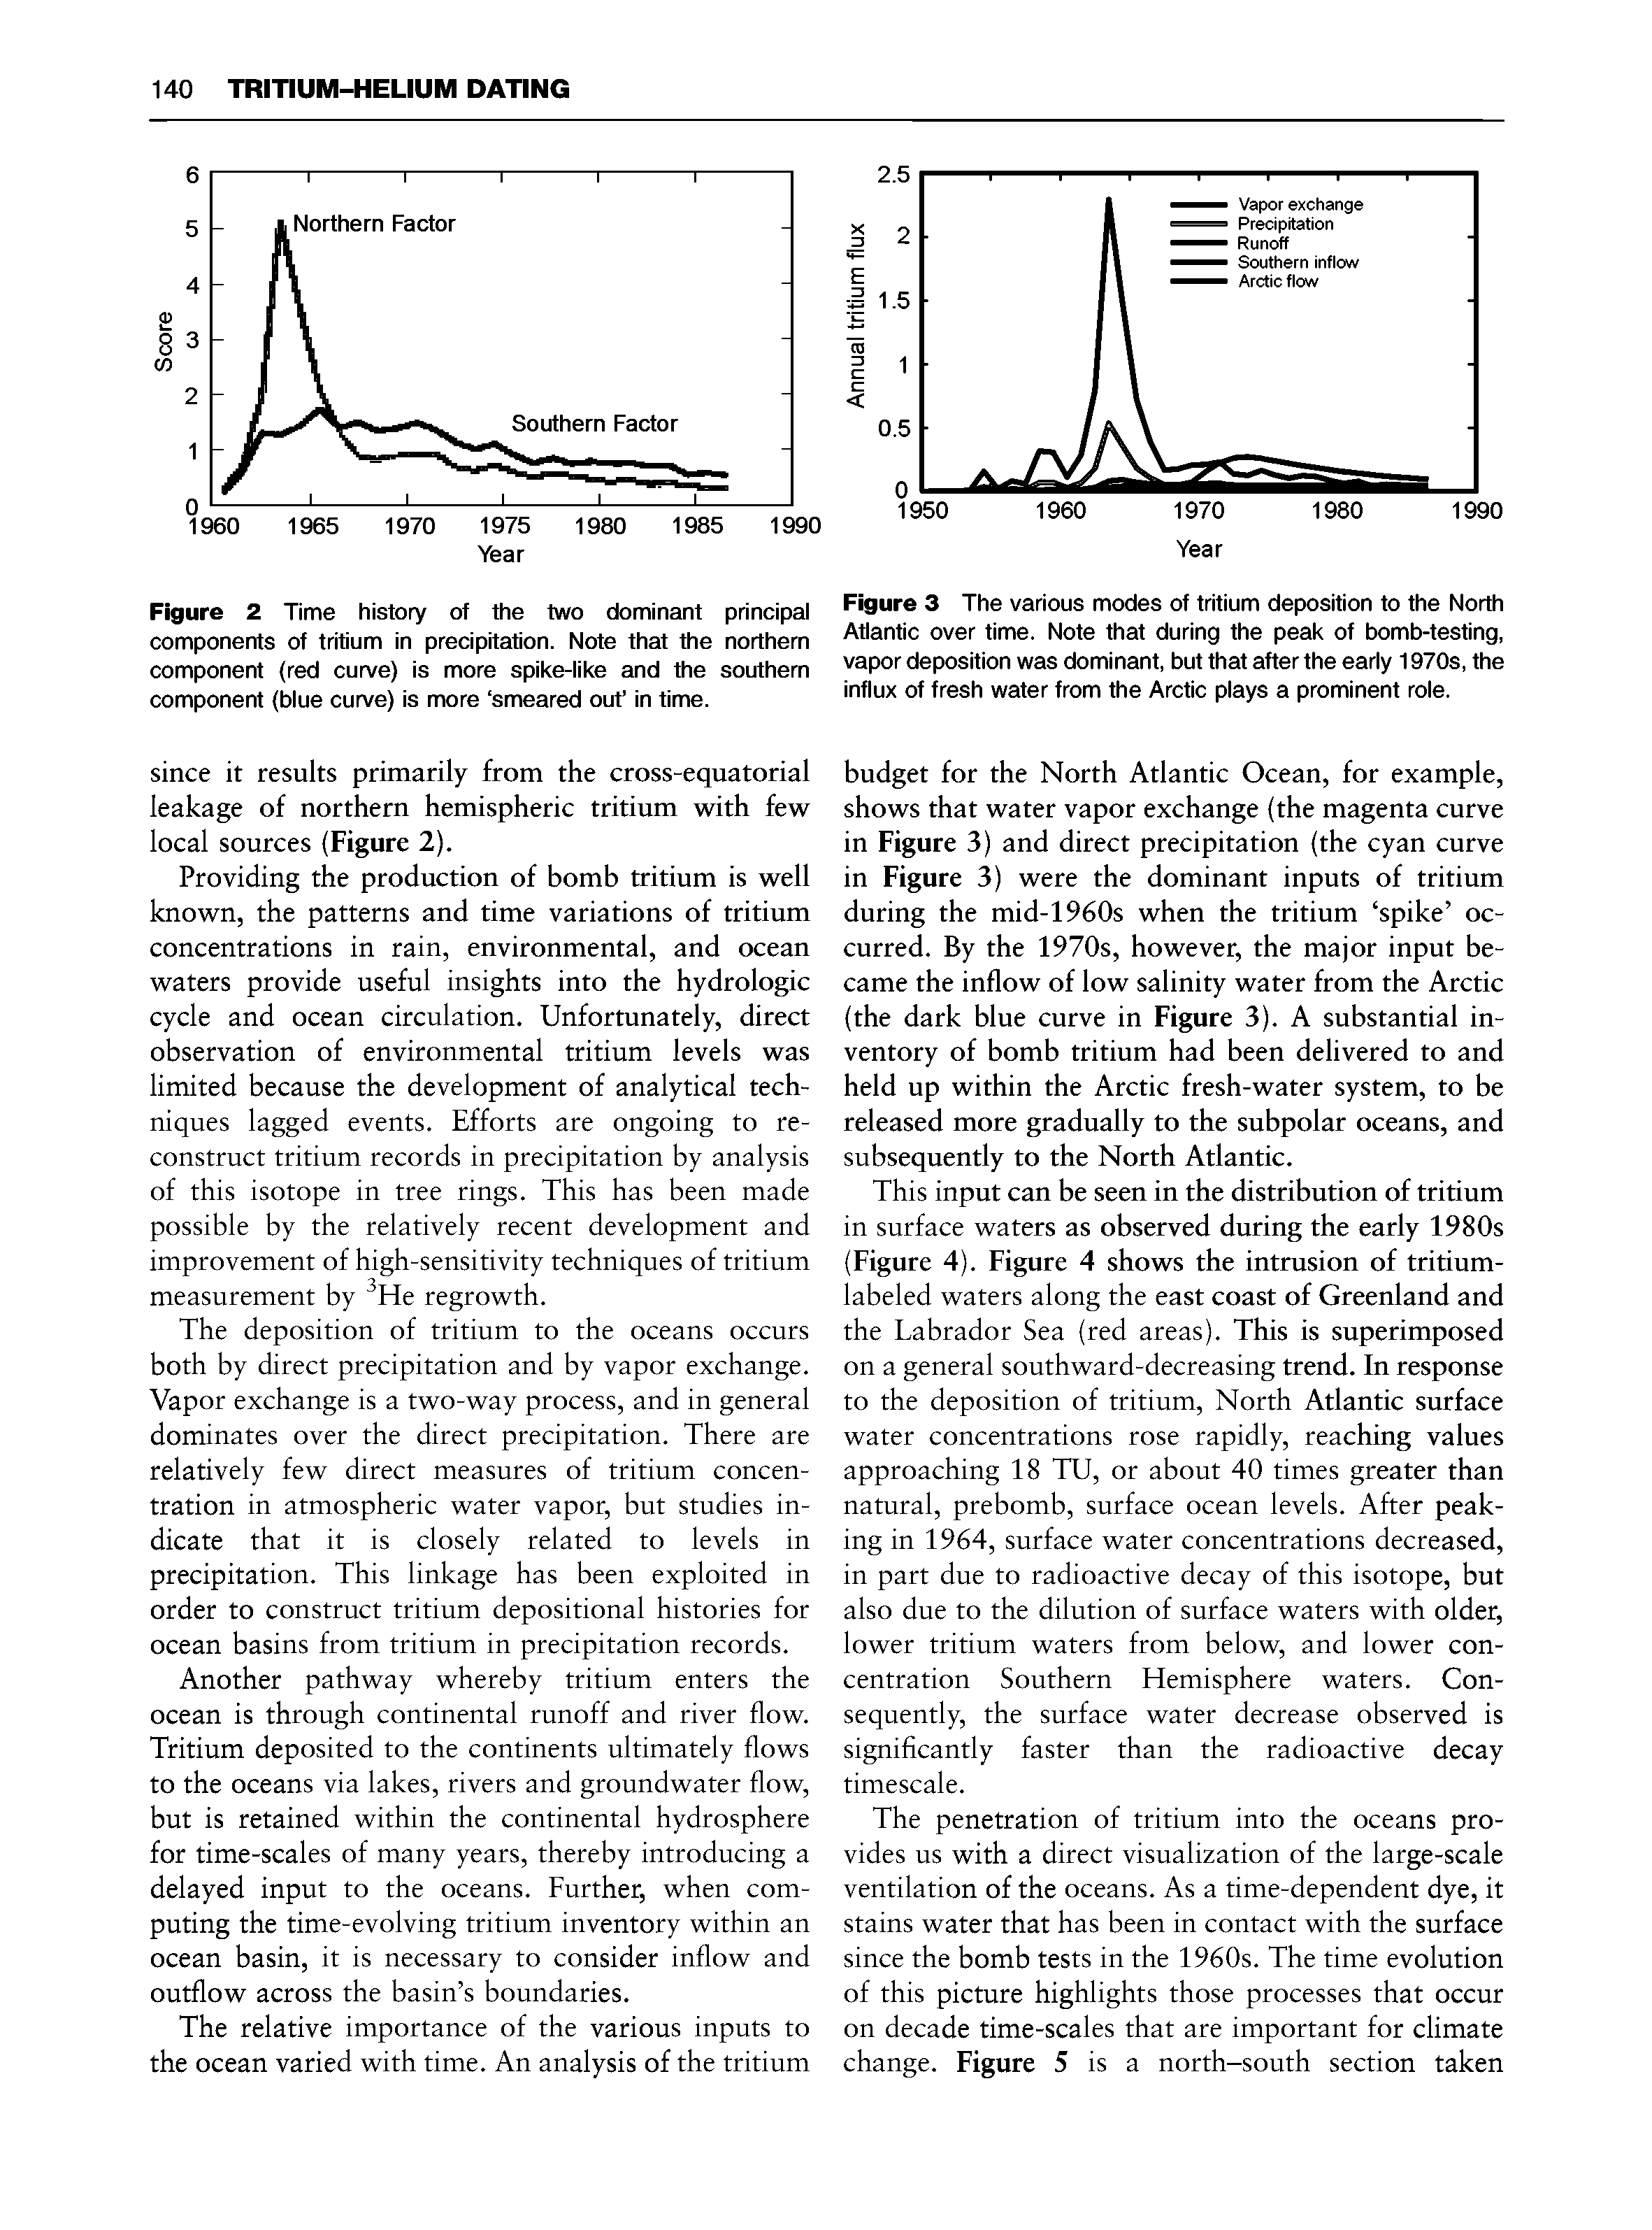 Figure 2 Time history of the two dominant principal components of tritium in precipitation. Note that the northern component (red curve) is more spike-like and the southern component (blue curve) is more smeared out in time.